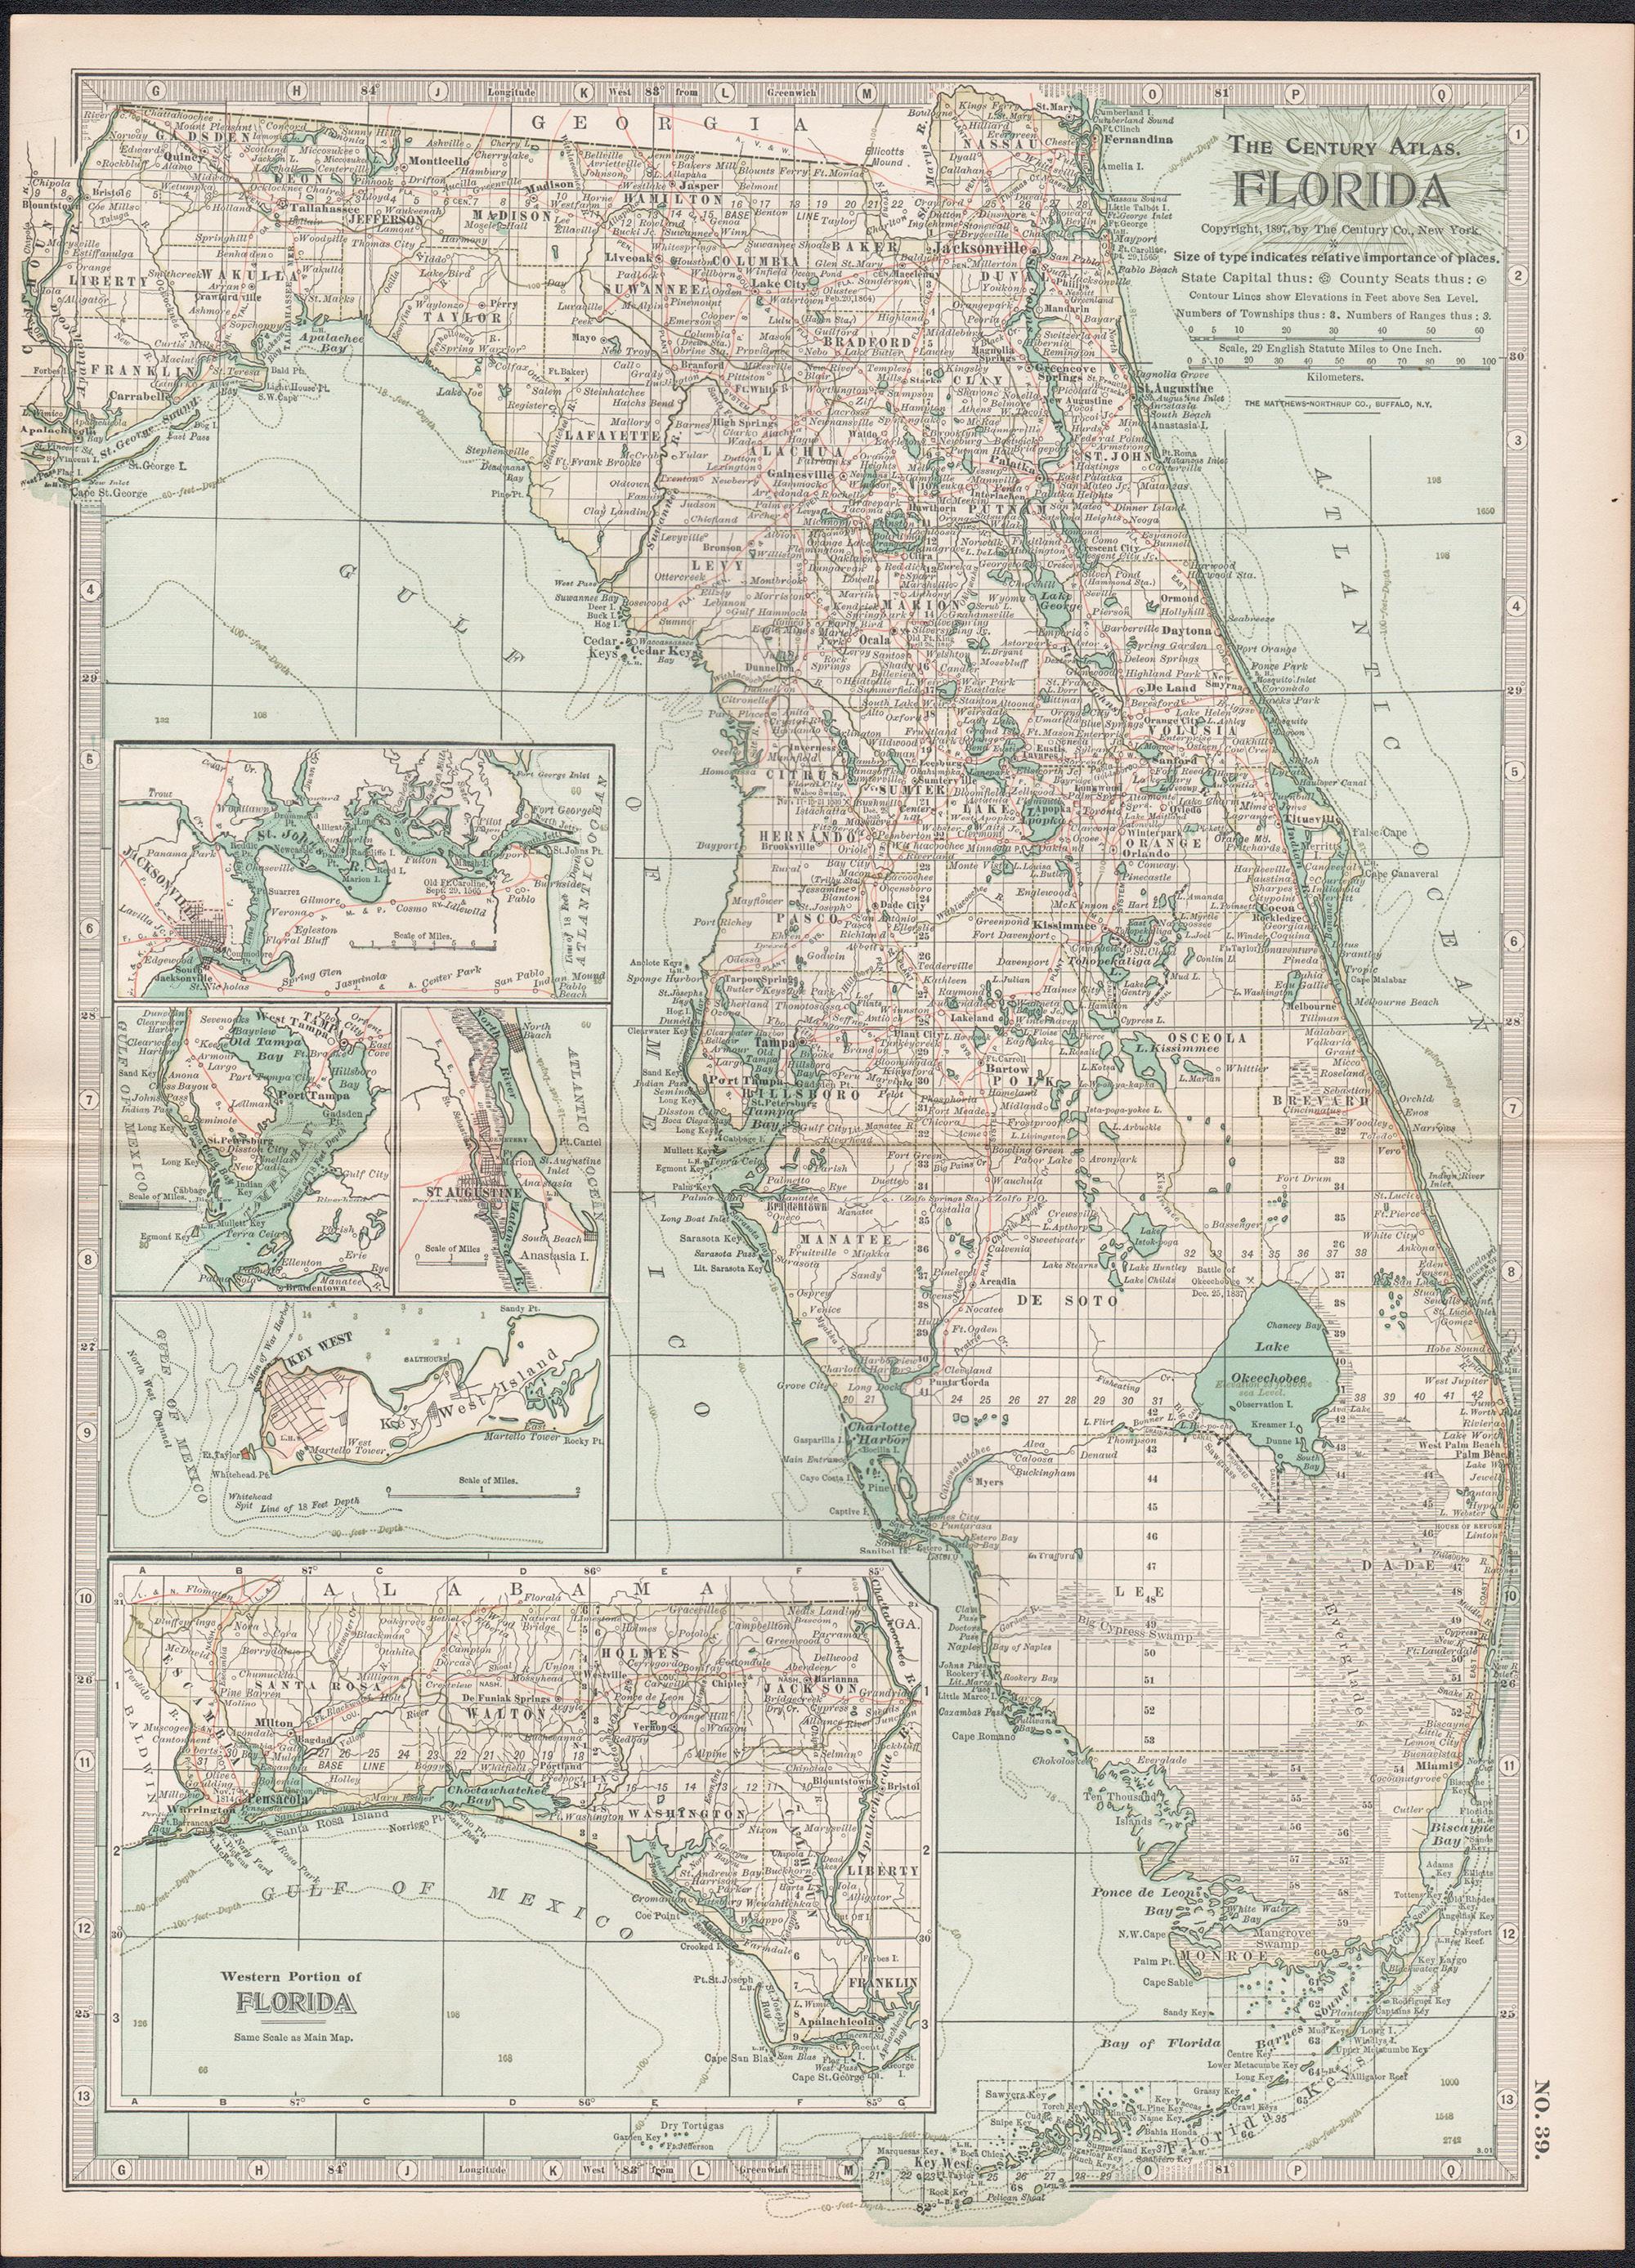 Florida. USA Century Atlas state antique vintage map - Print by Unknown